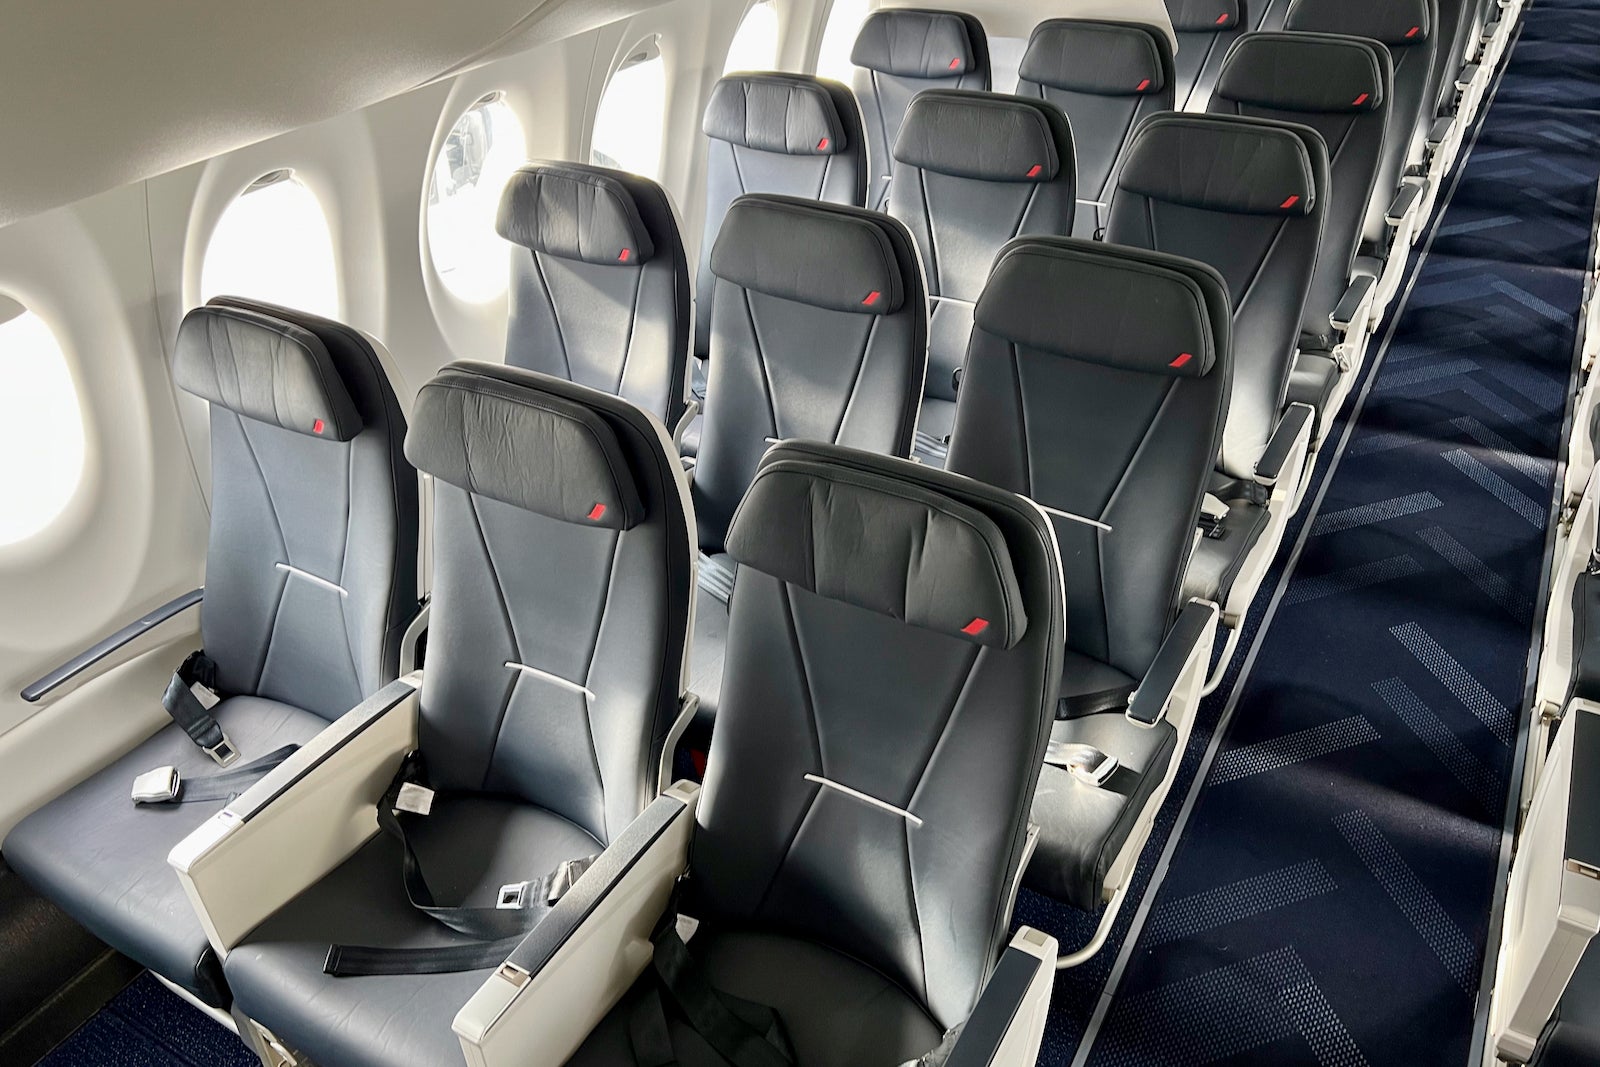 Air France A220-300 business class is a solid step in the right